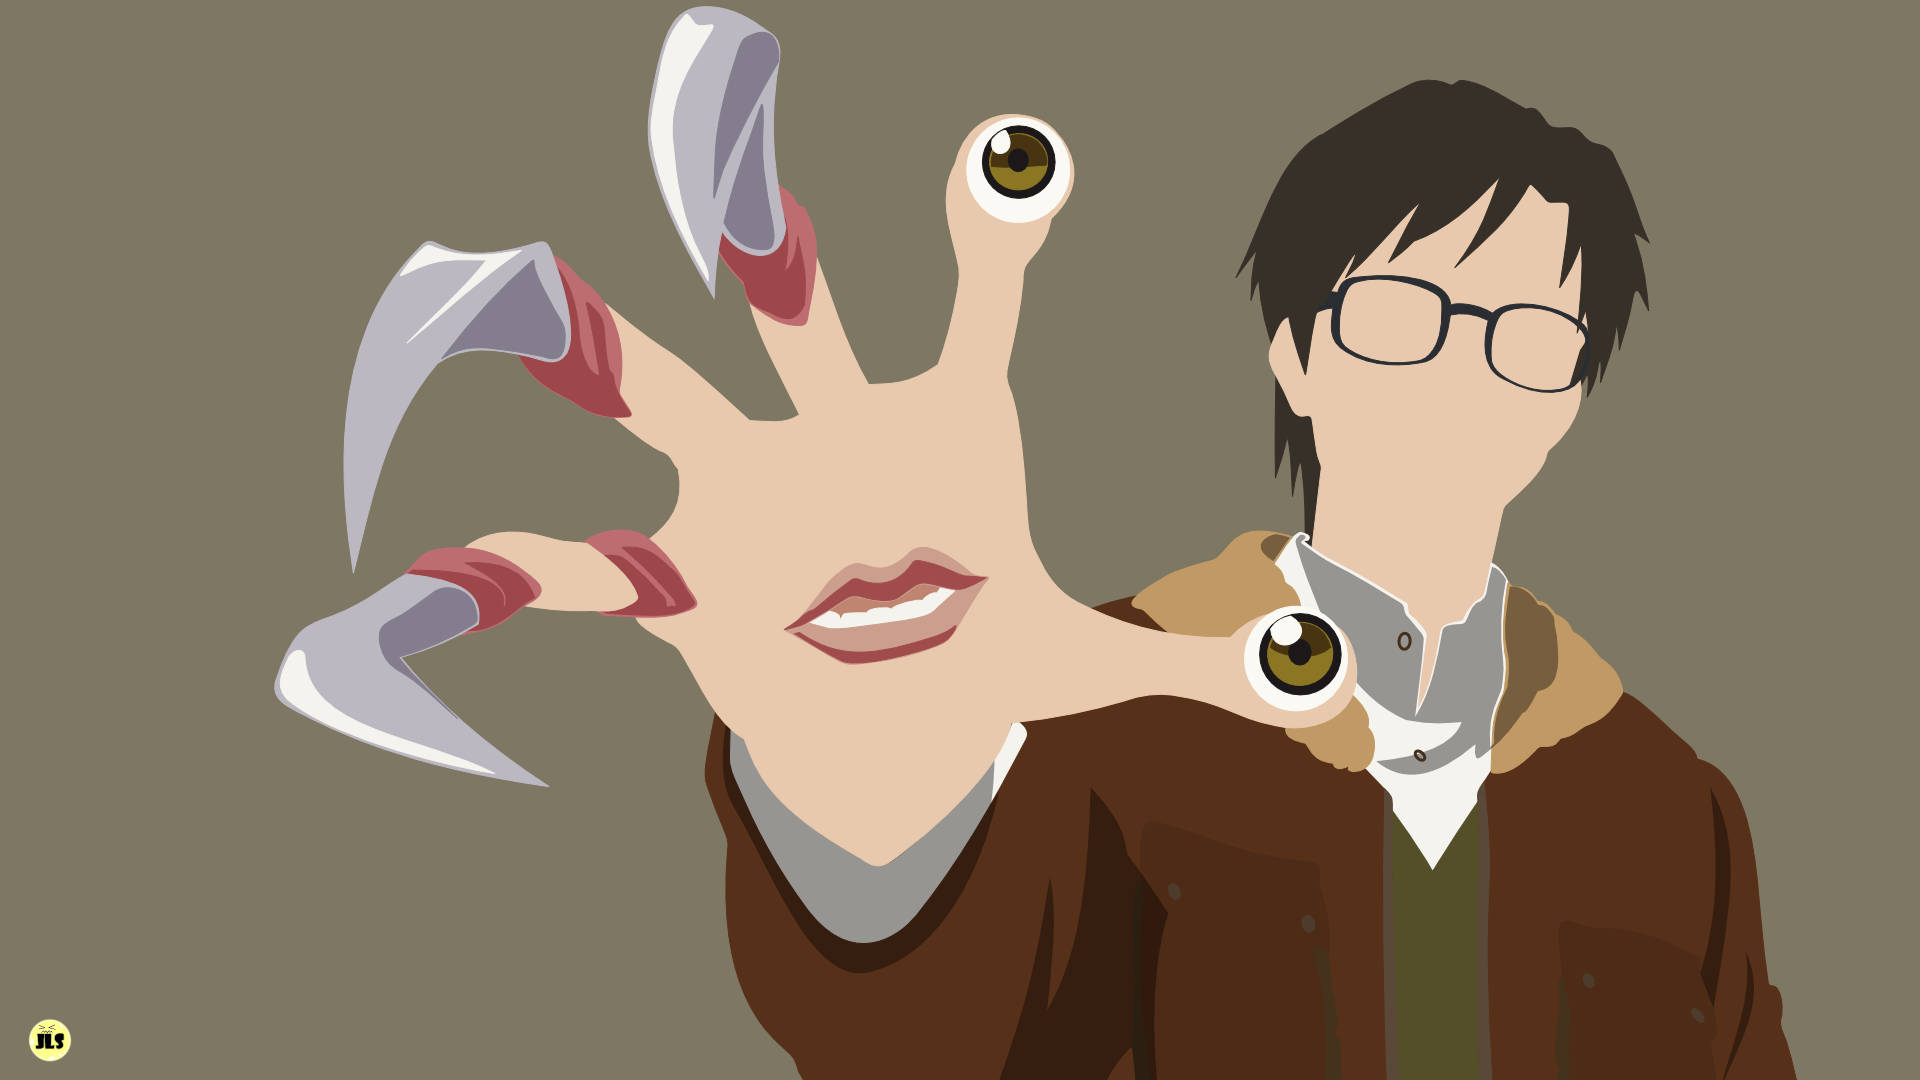 Download The Parasyte Poster Wallpaper 